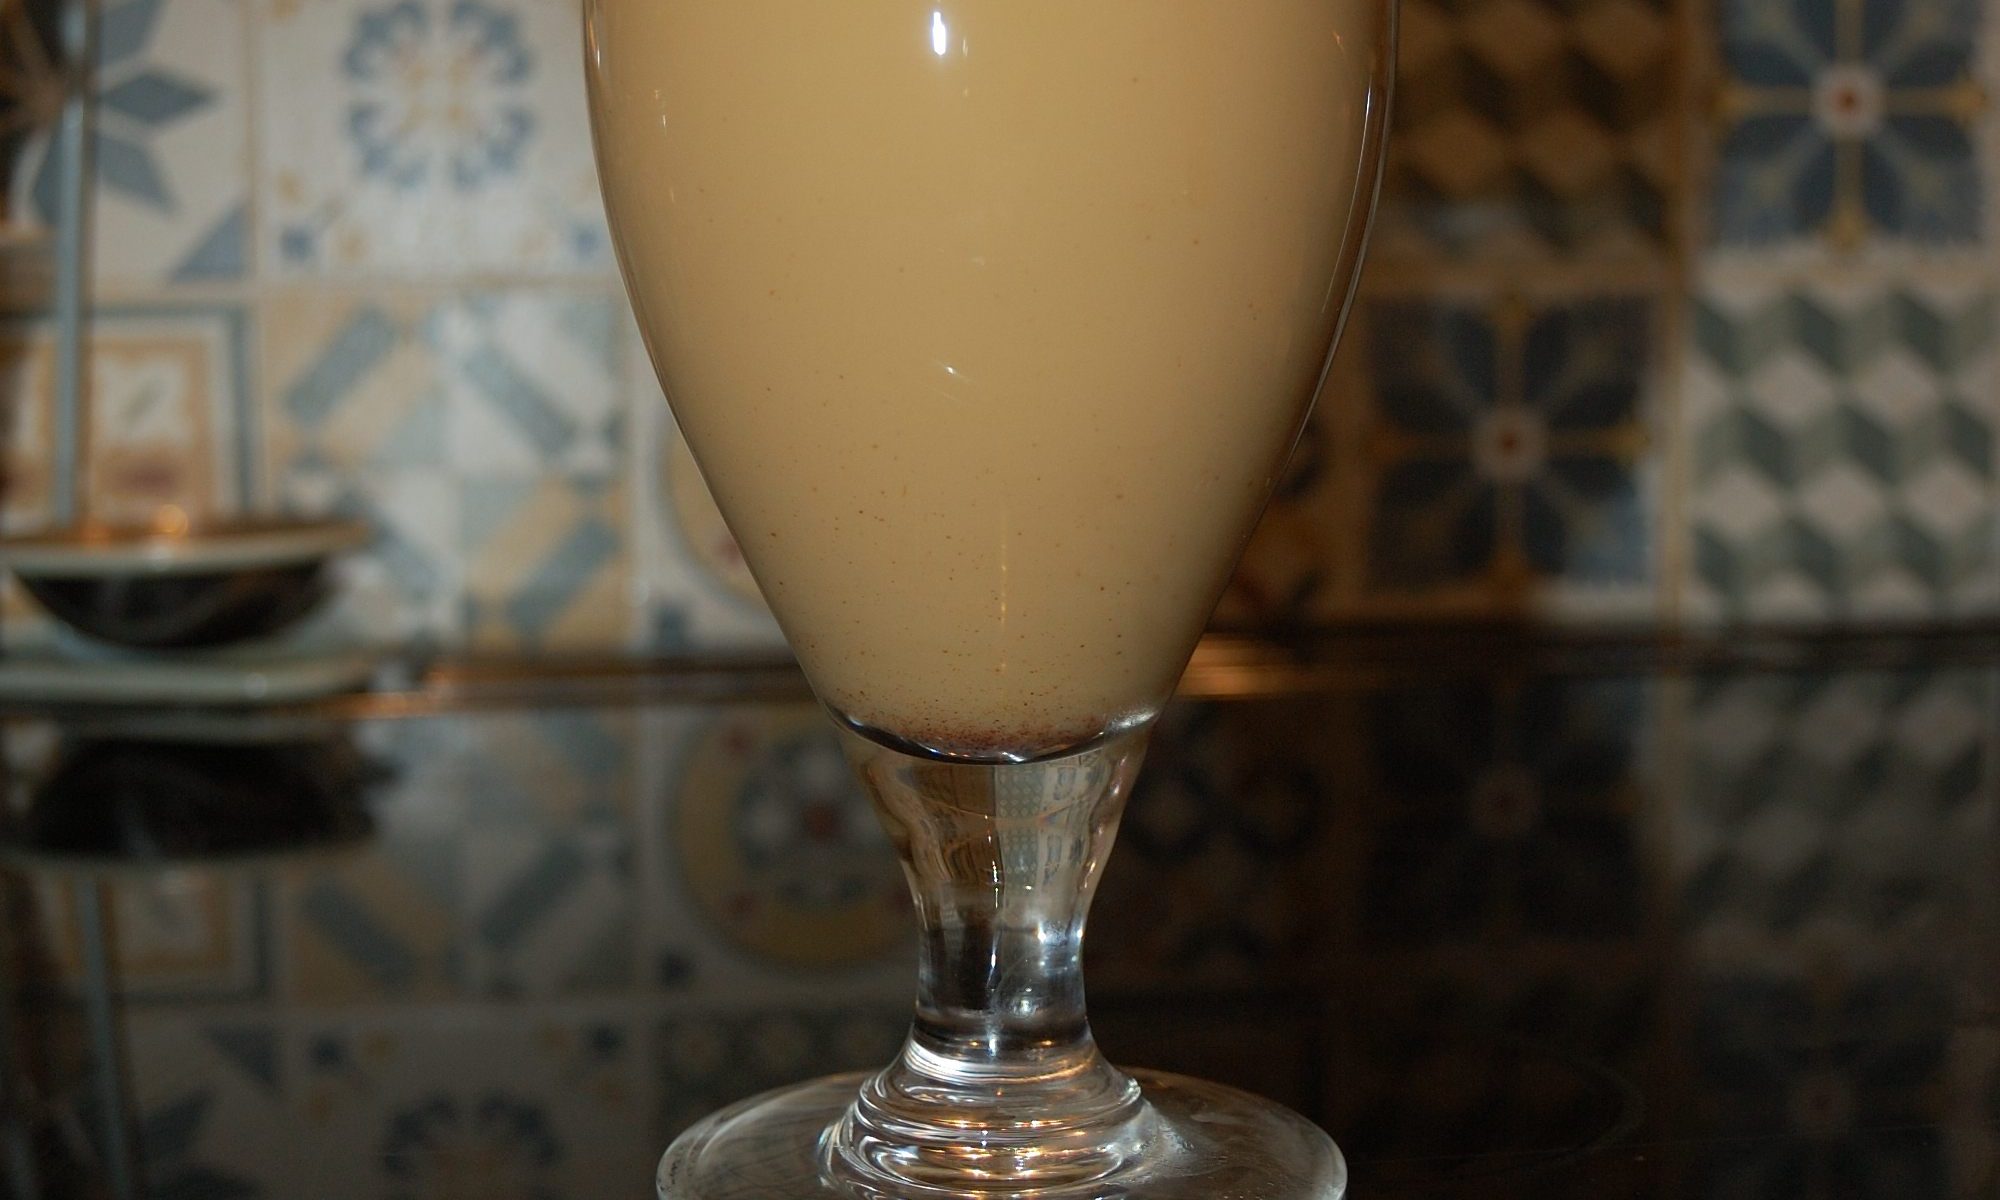 A finished glass of butter beer